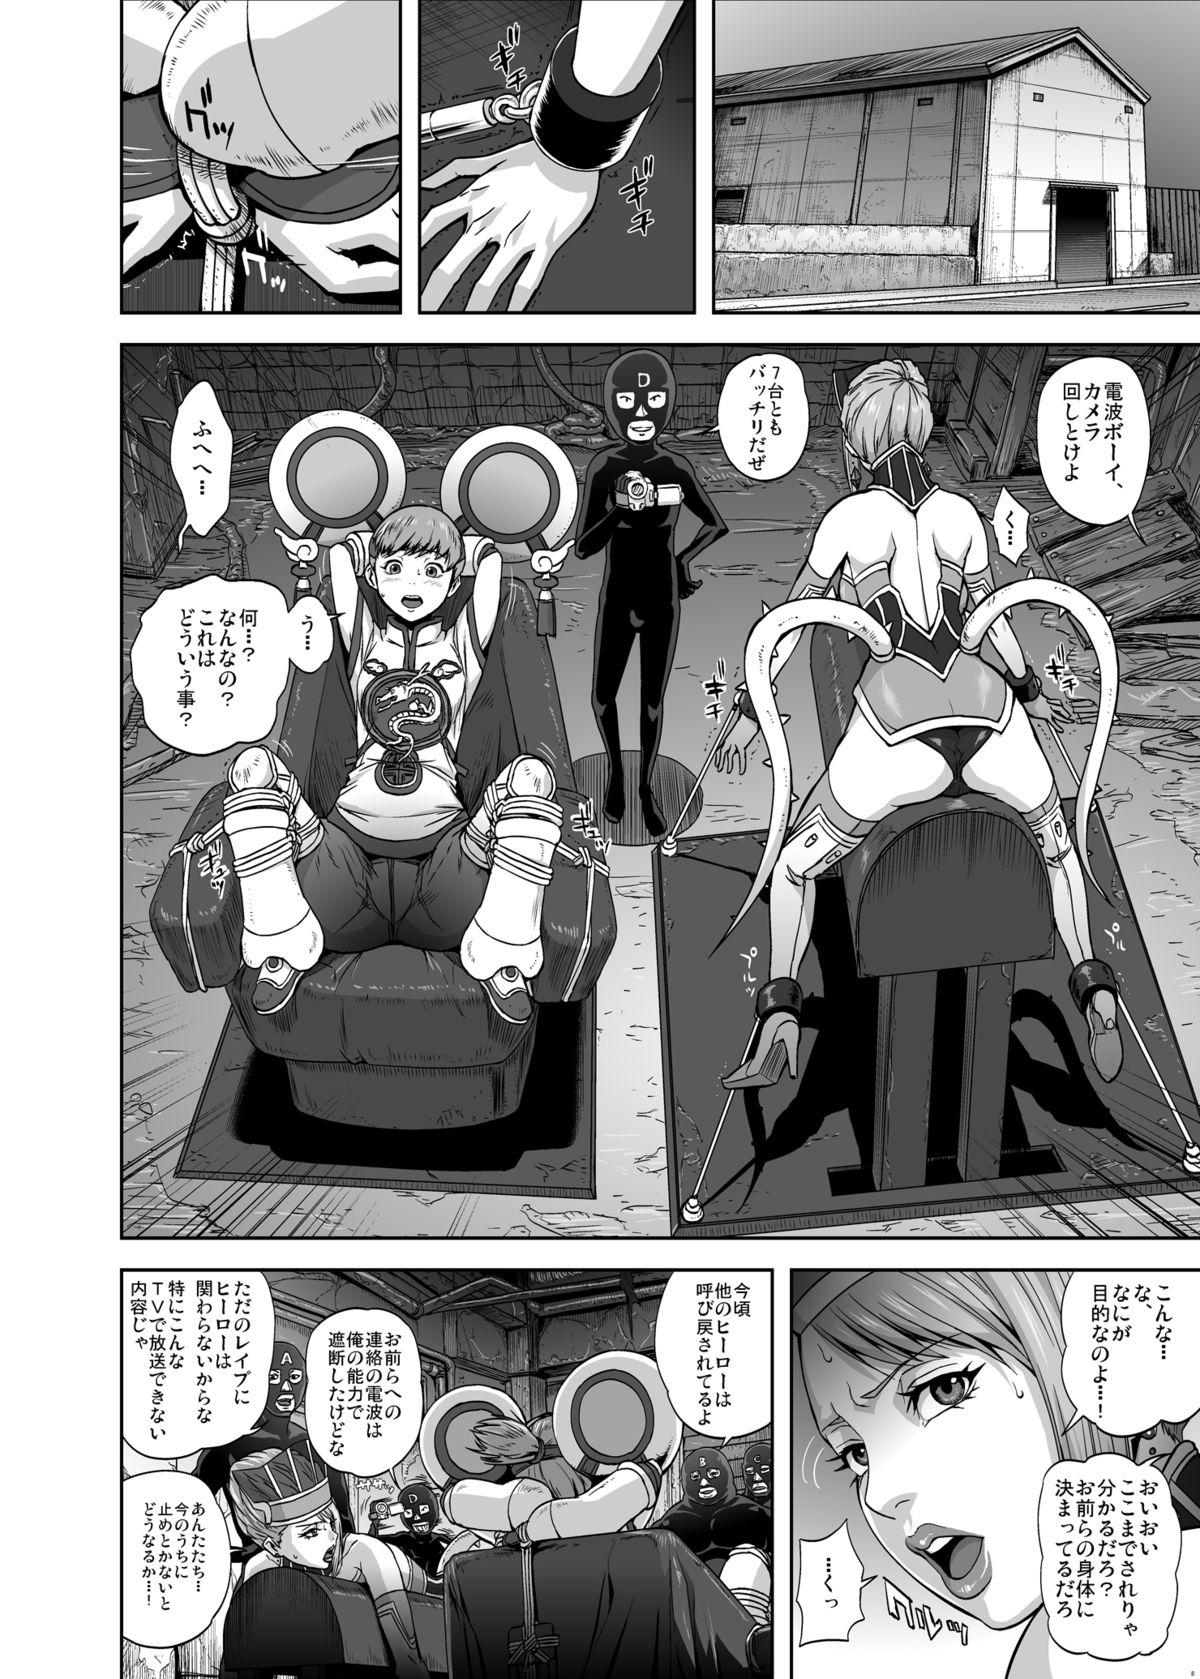 Realsex DRAGON & ROSE - Tiger and bunny Amature Sex Tapes - Page 7